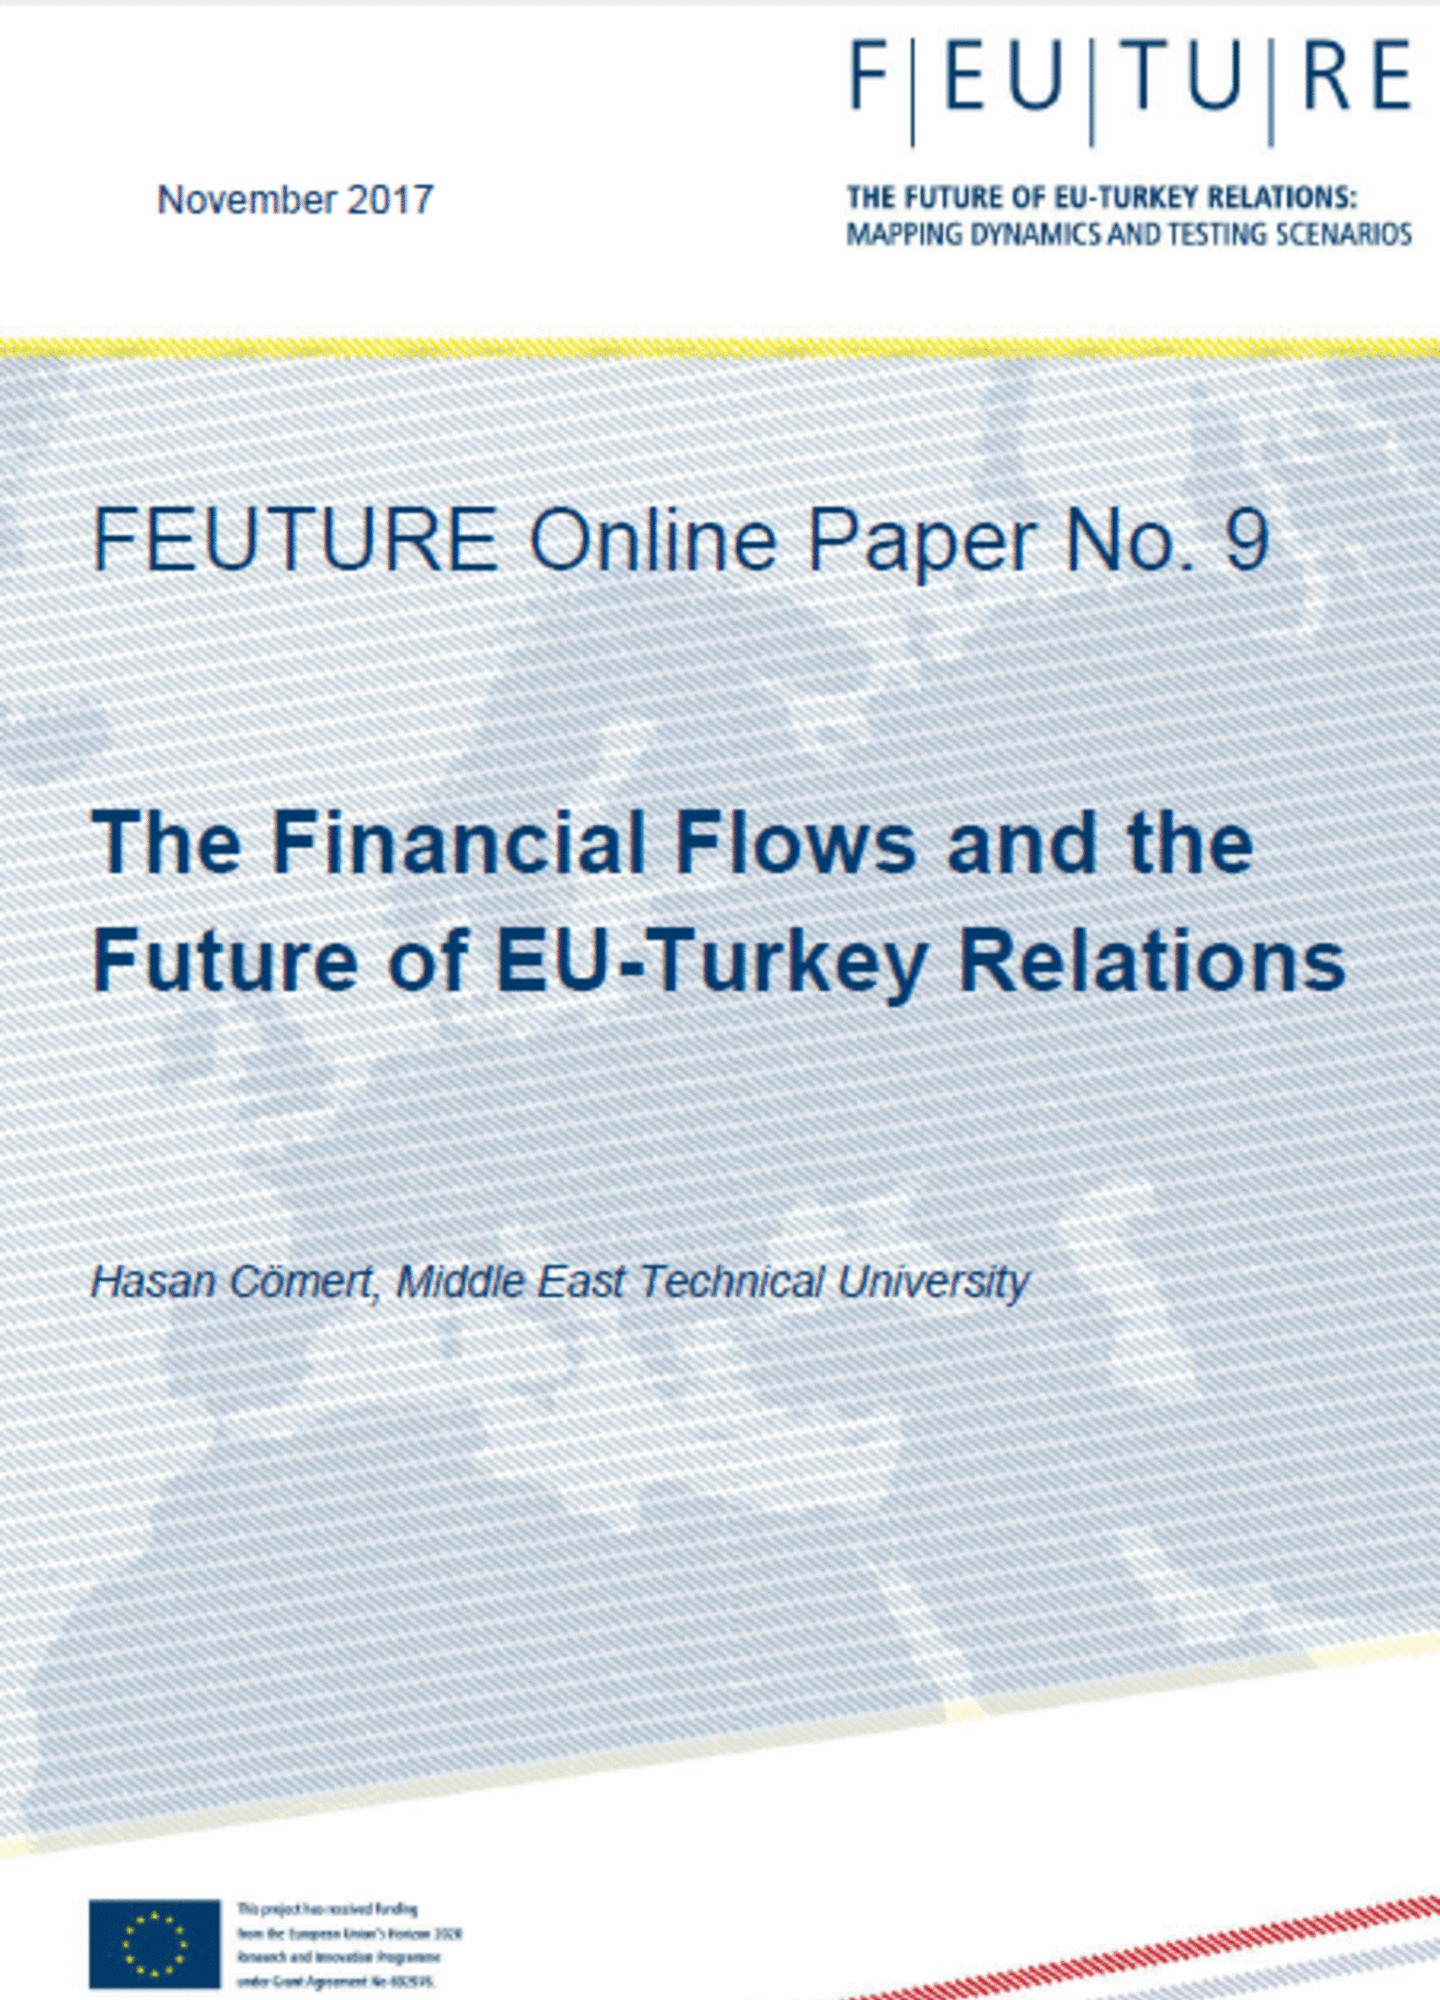 The Financial Flows and the Future of EU-Turkey Relations